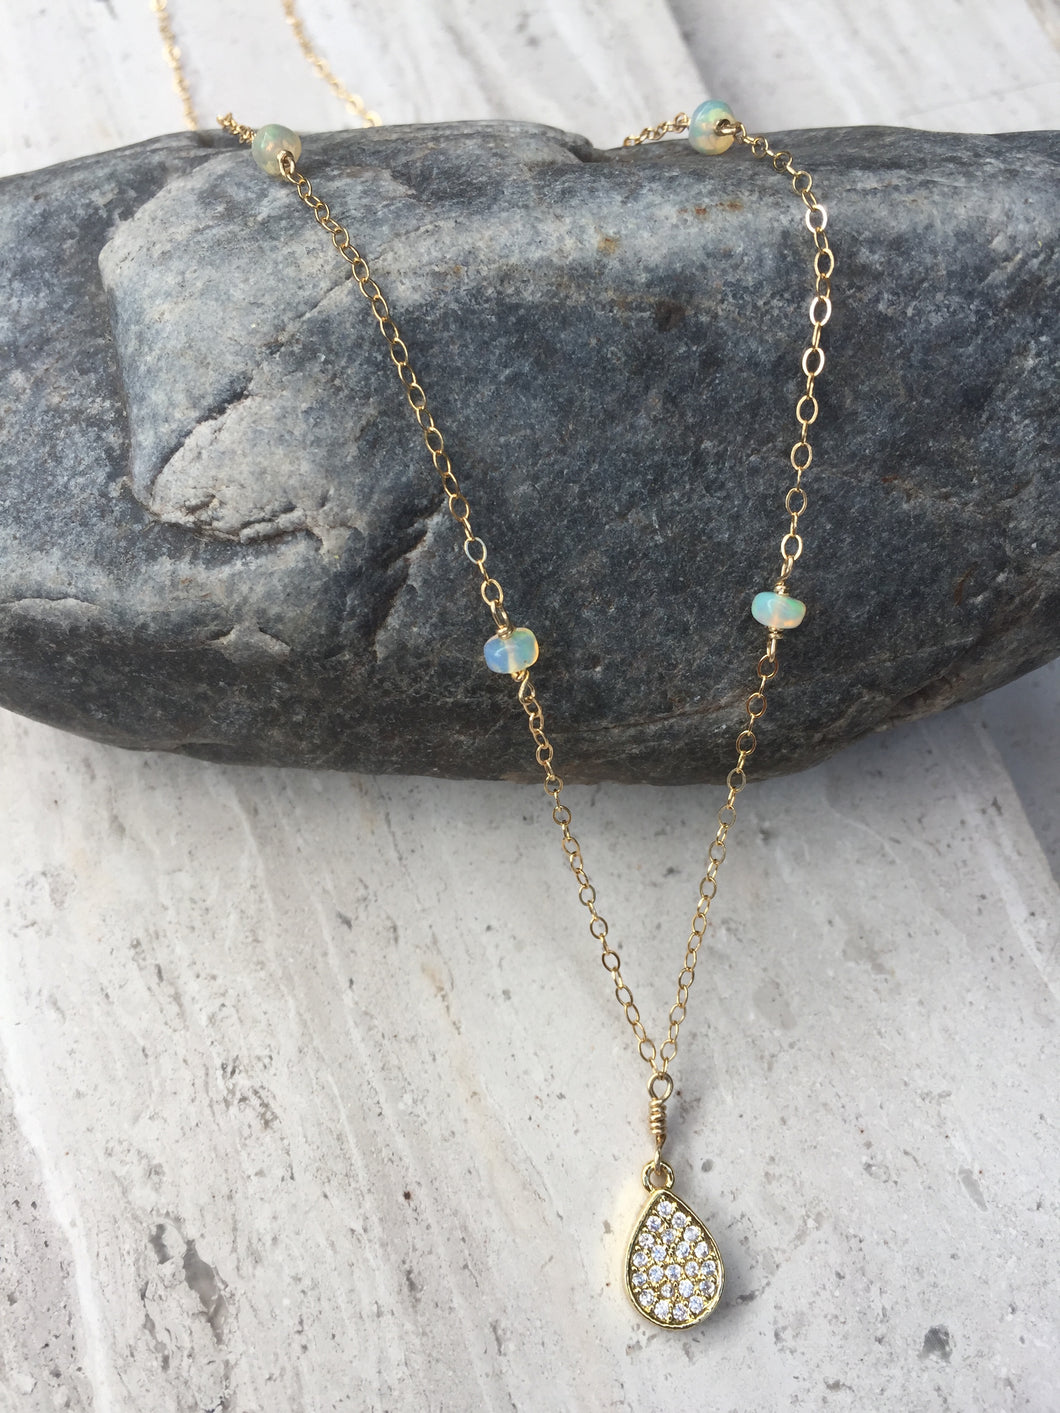 Opal and CZ Drop Necklace on rock